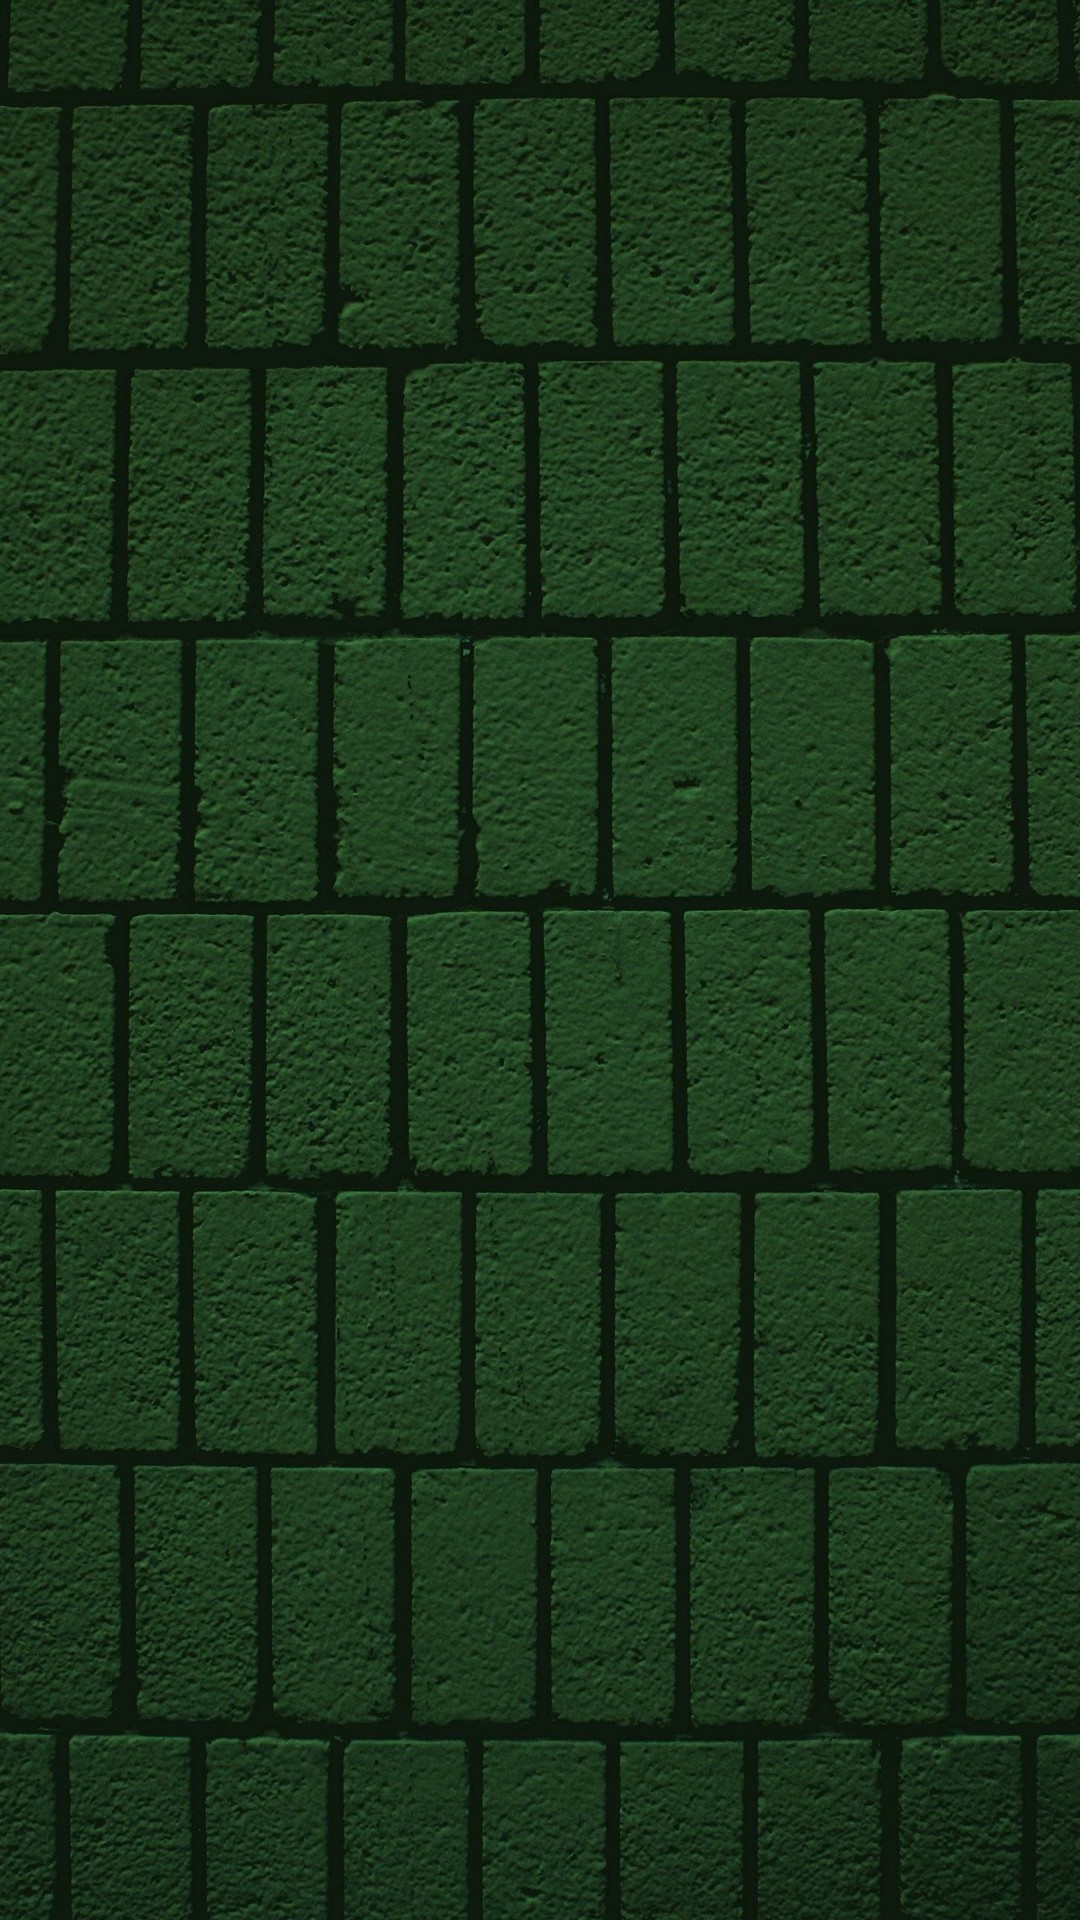 Dark Green Wallpaper iPhone with image resolution 1080x1920 pixel. You can make this wallpaper for your iPhone 5, 6, 7, 8, X backgrounds, Mobile Screensaver, or iPad Lock Screen